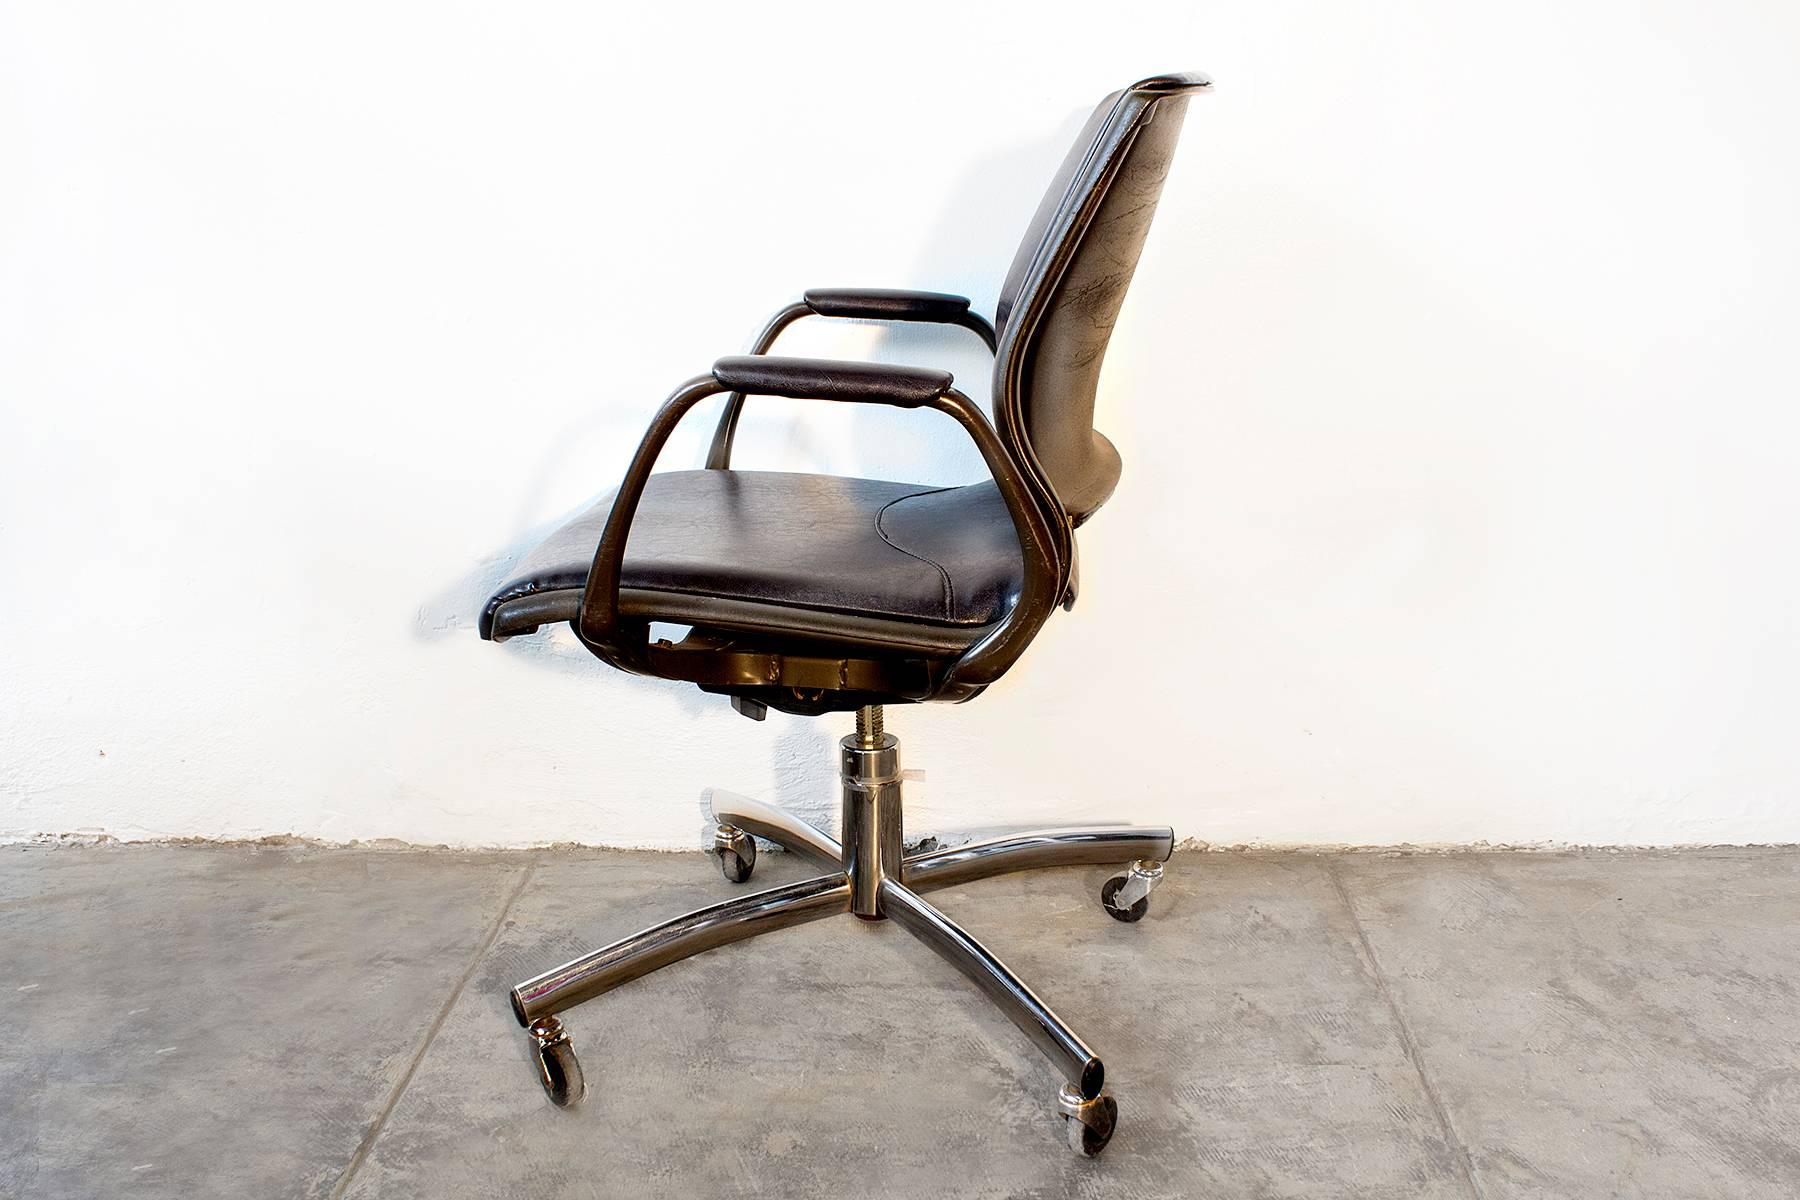 Very cool 1980s era steelcase office chair with steel base and reupholstered vinyl seat. This mod seat tilts, swivels and adjusts.